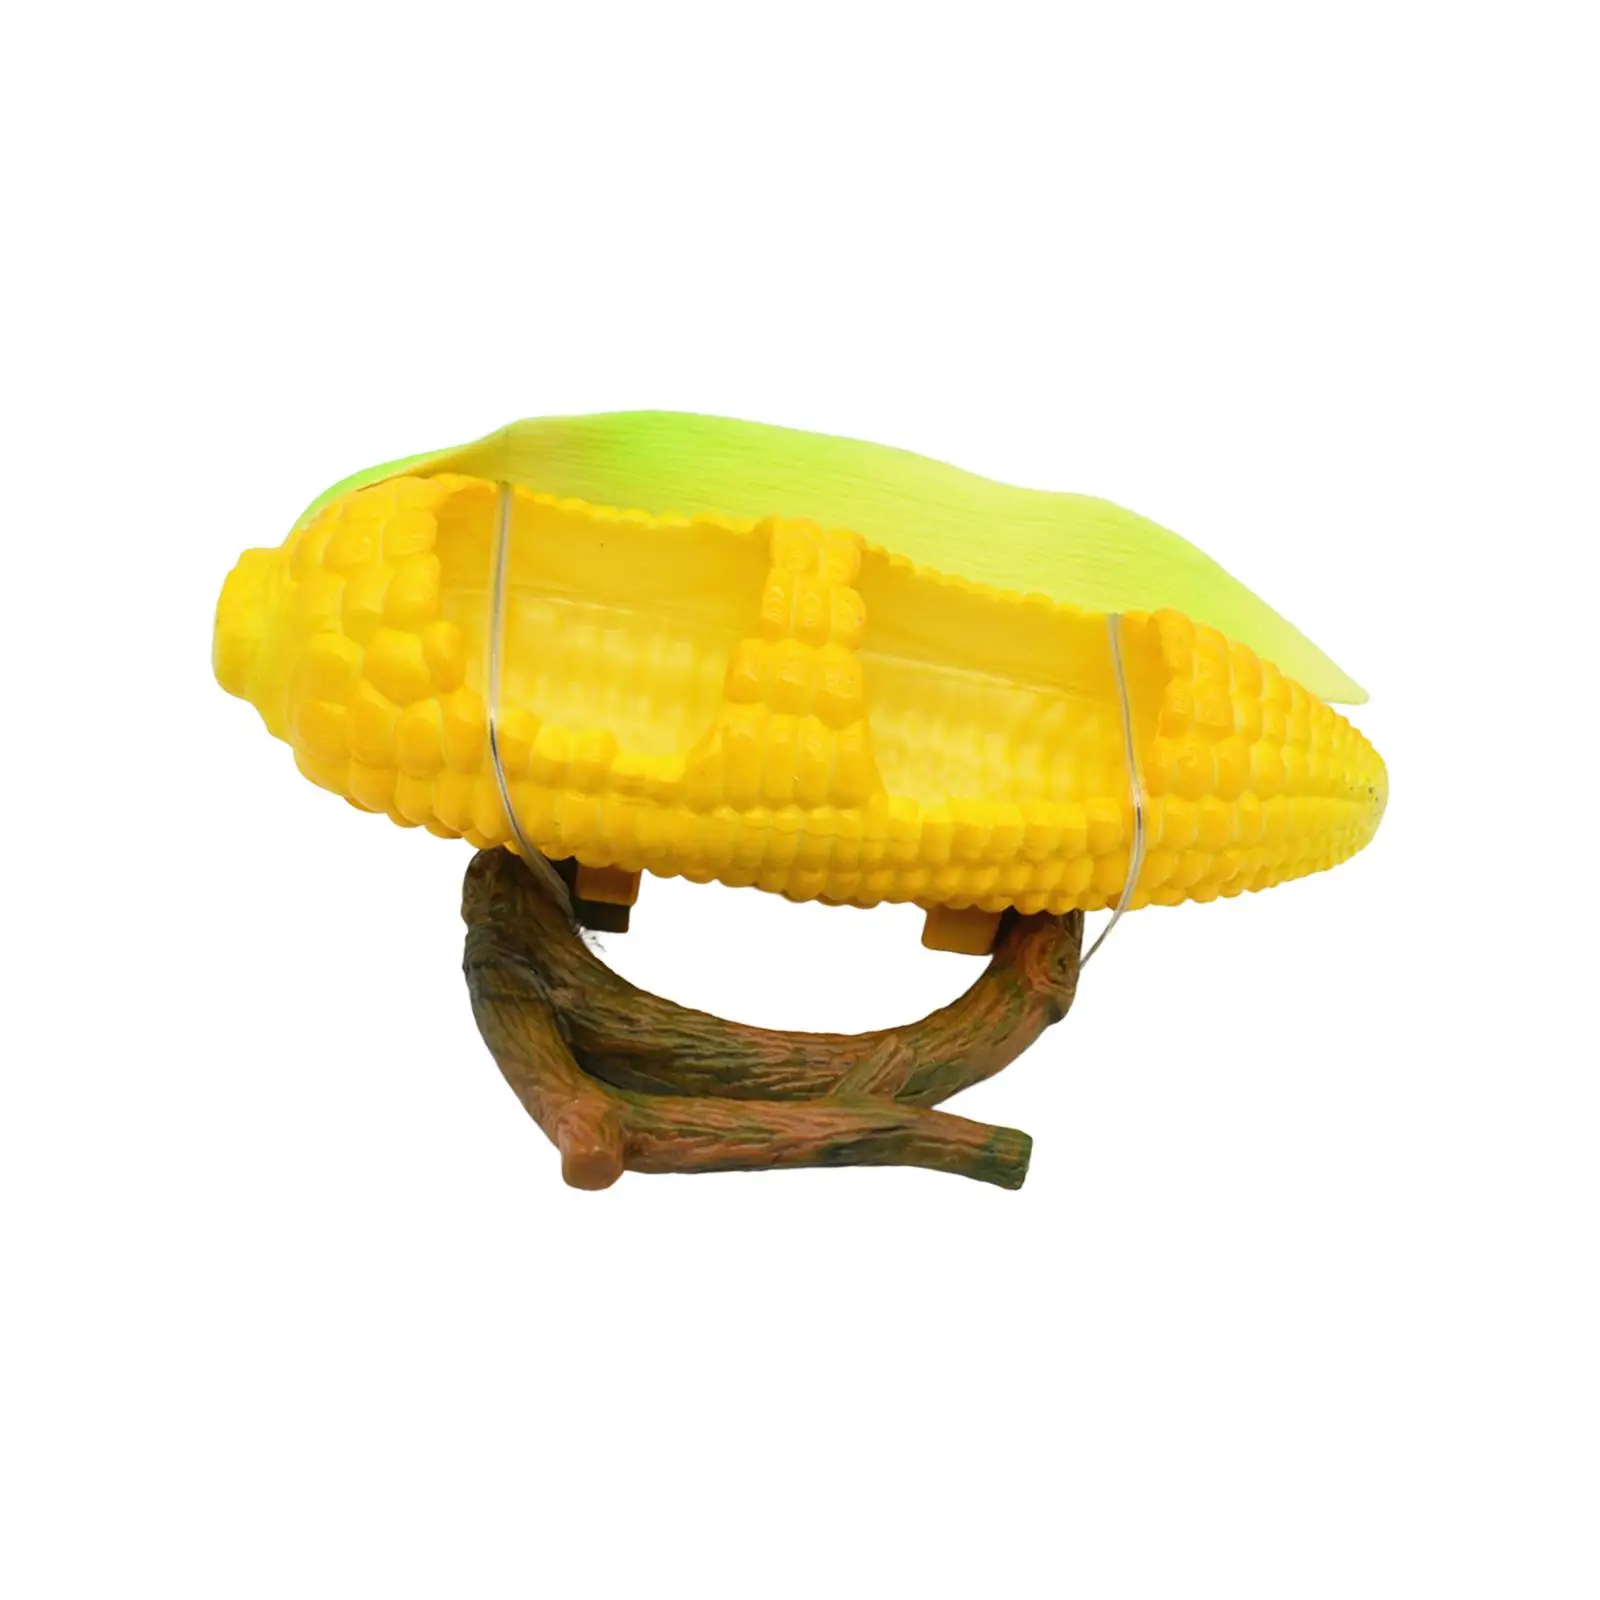 Simulation Corn Shaped Birds Feeder Bowl for Cockatiels Hamster PP Material Feeding Dish Convenient to Clean Lovely